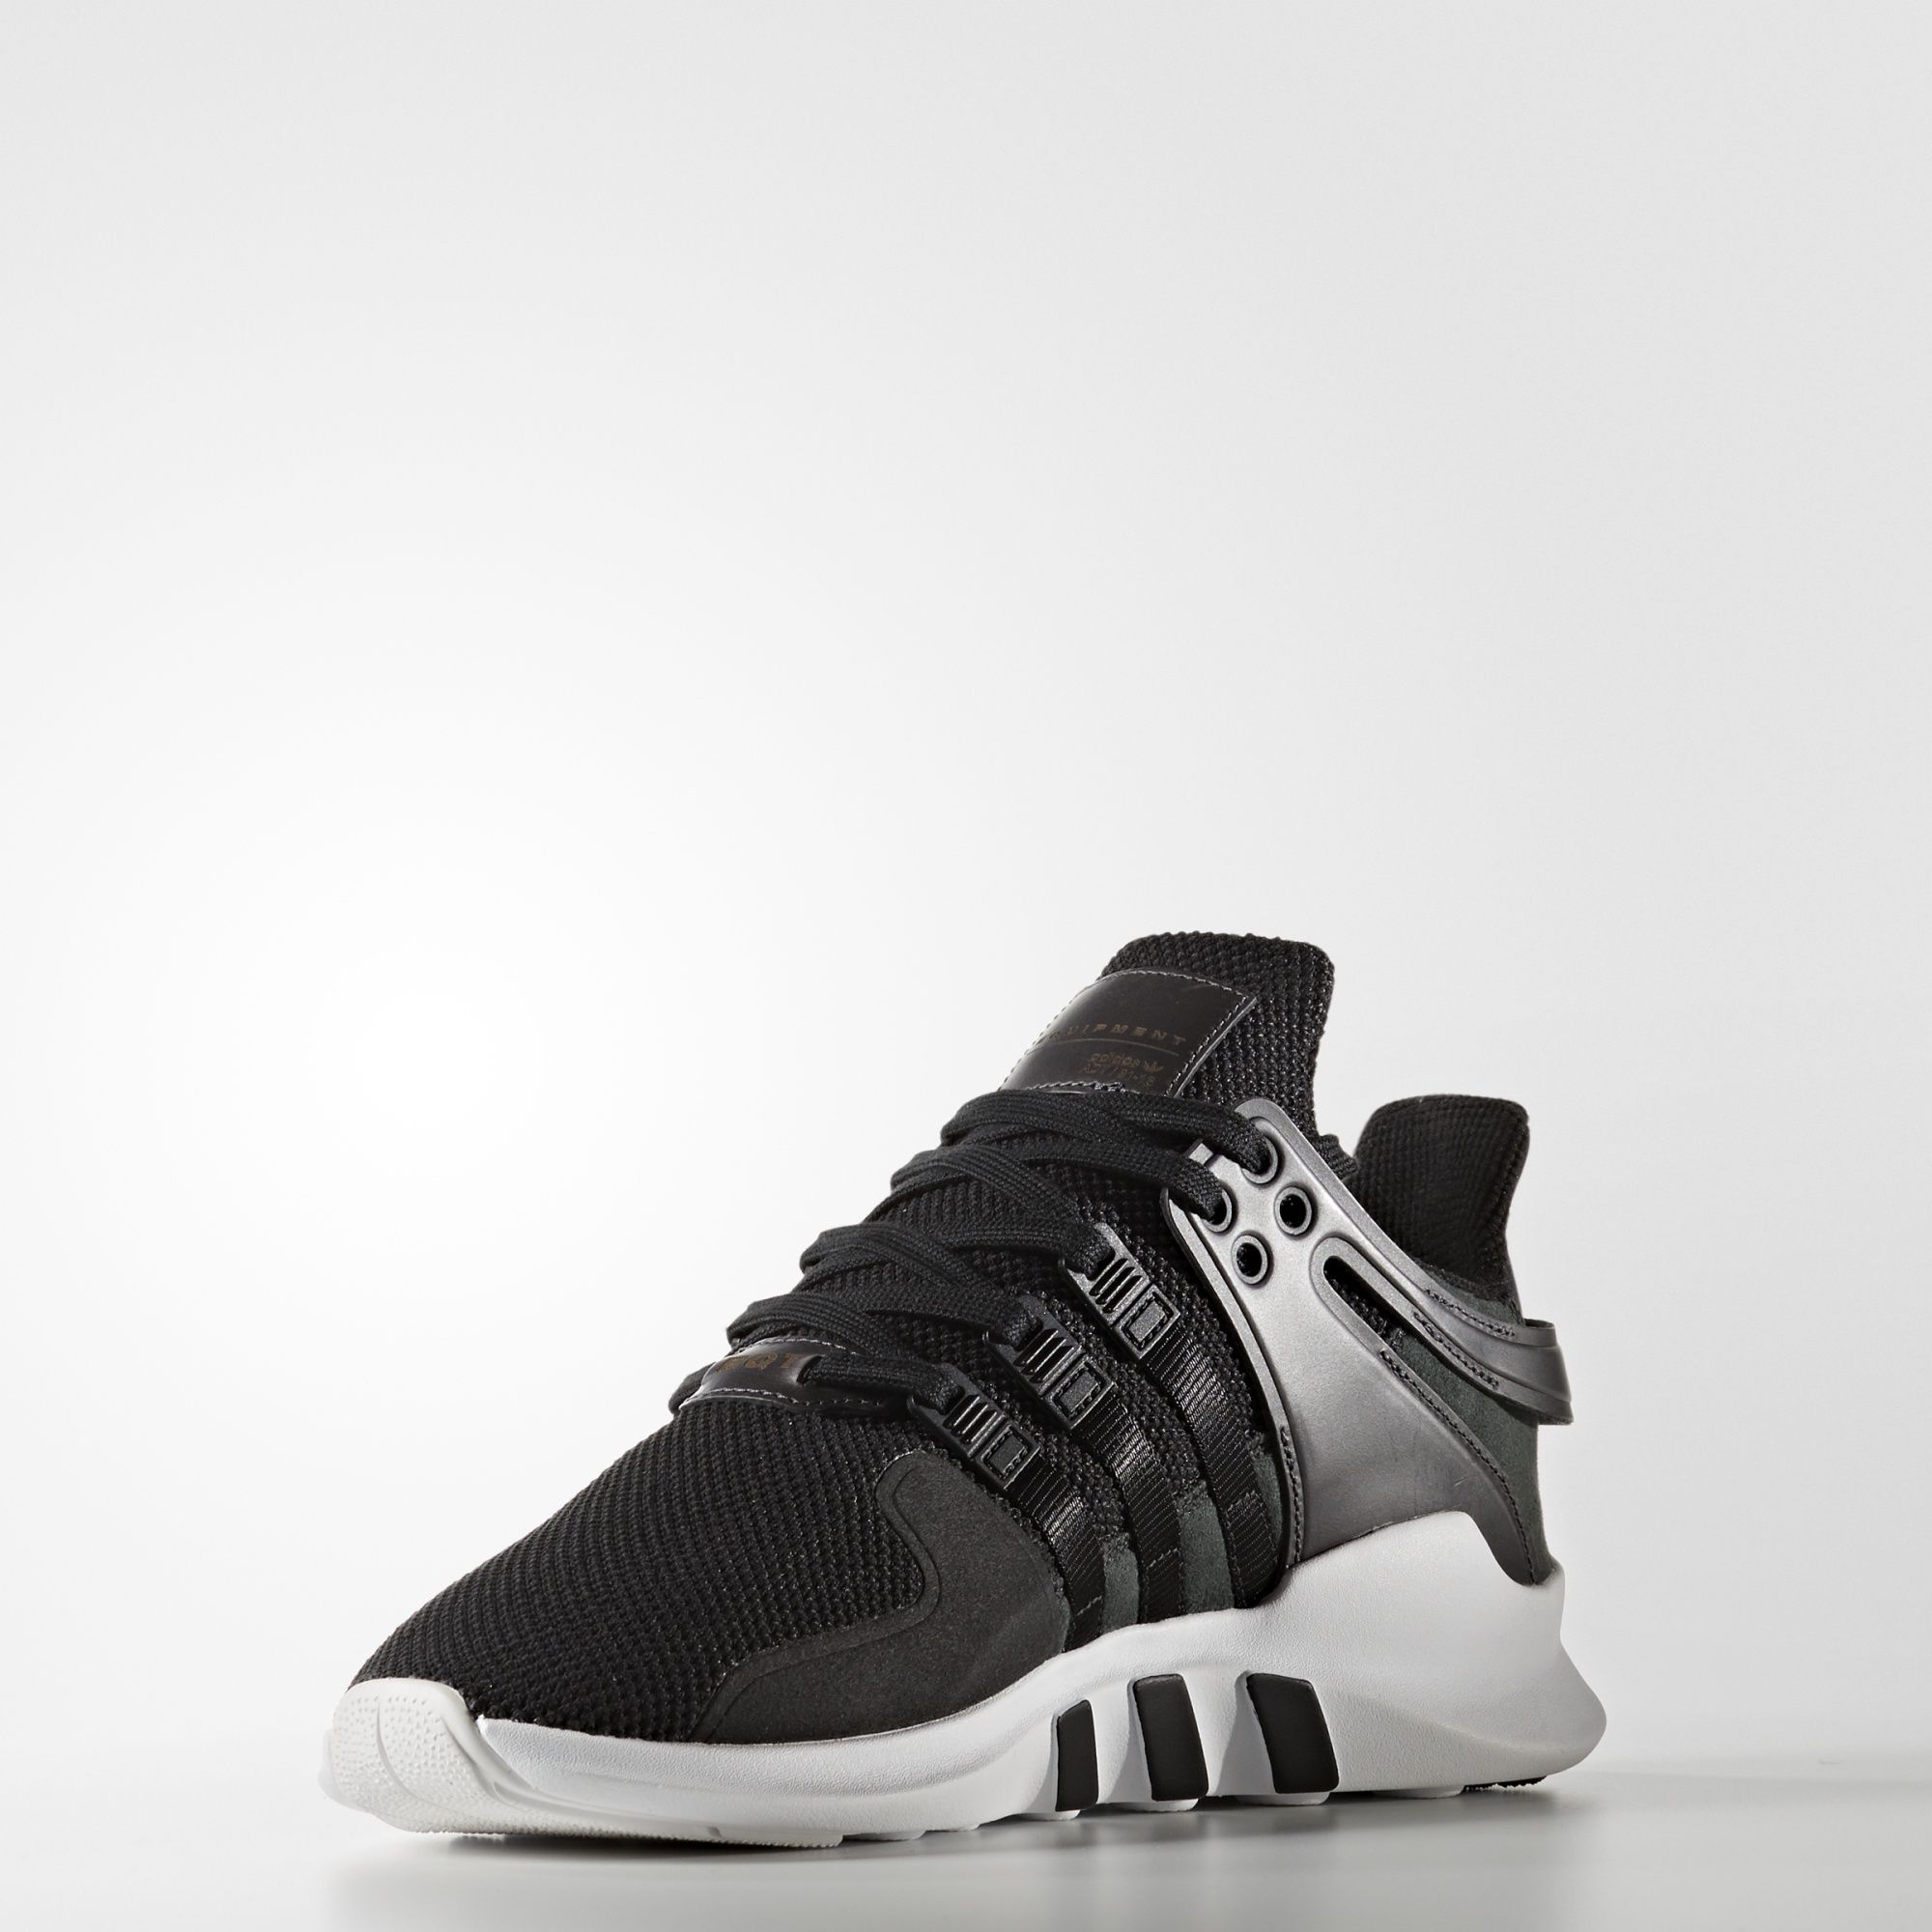 adidas-eqt-support-adv-milled-leather-pack-3